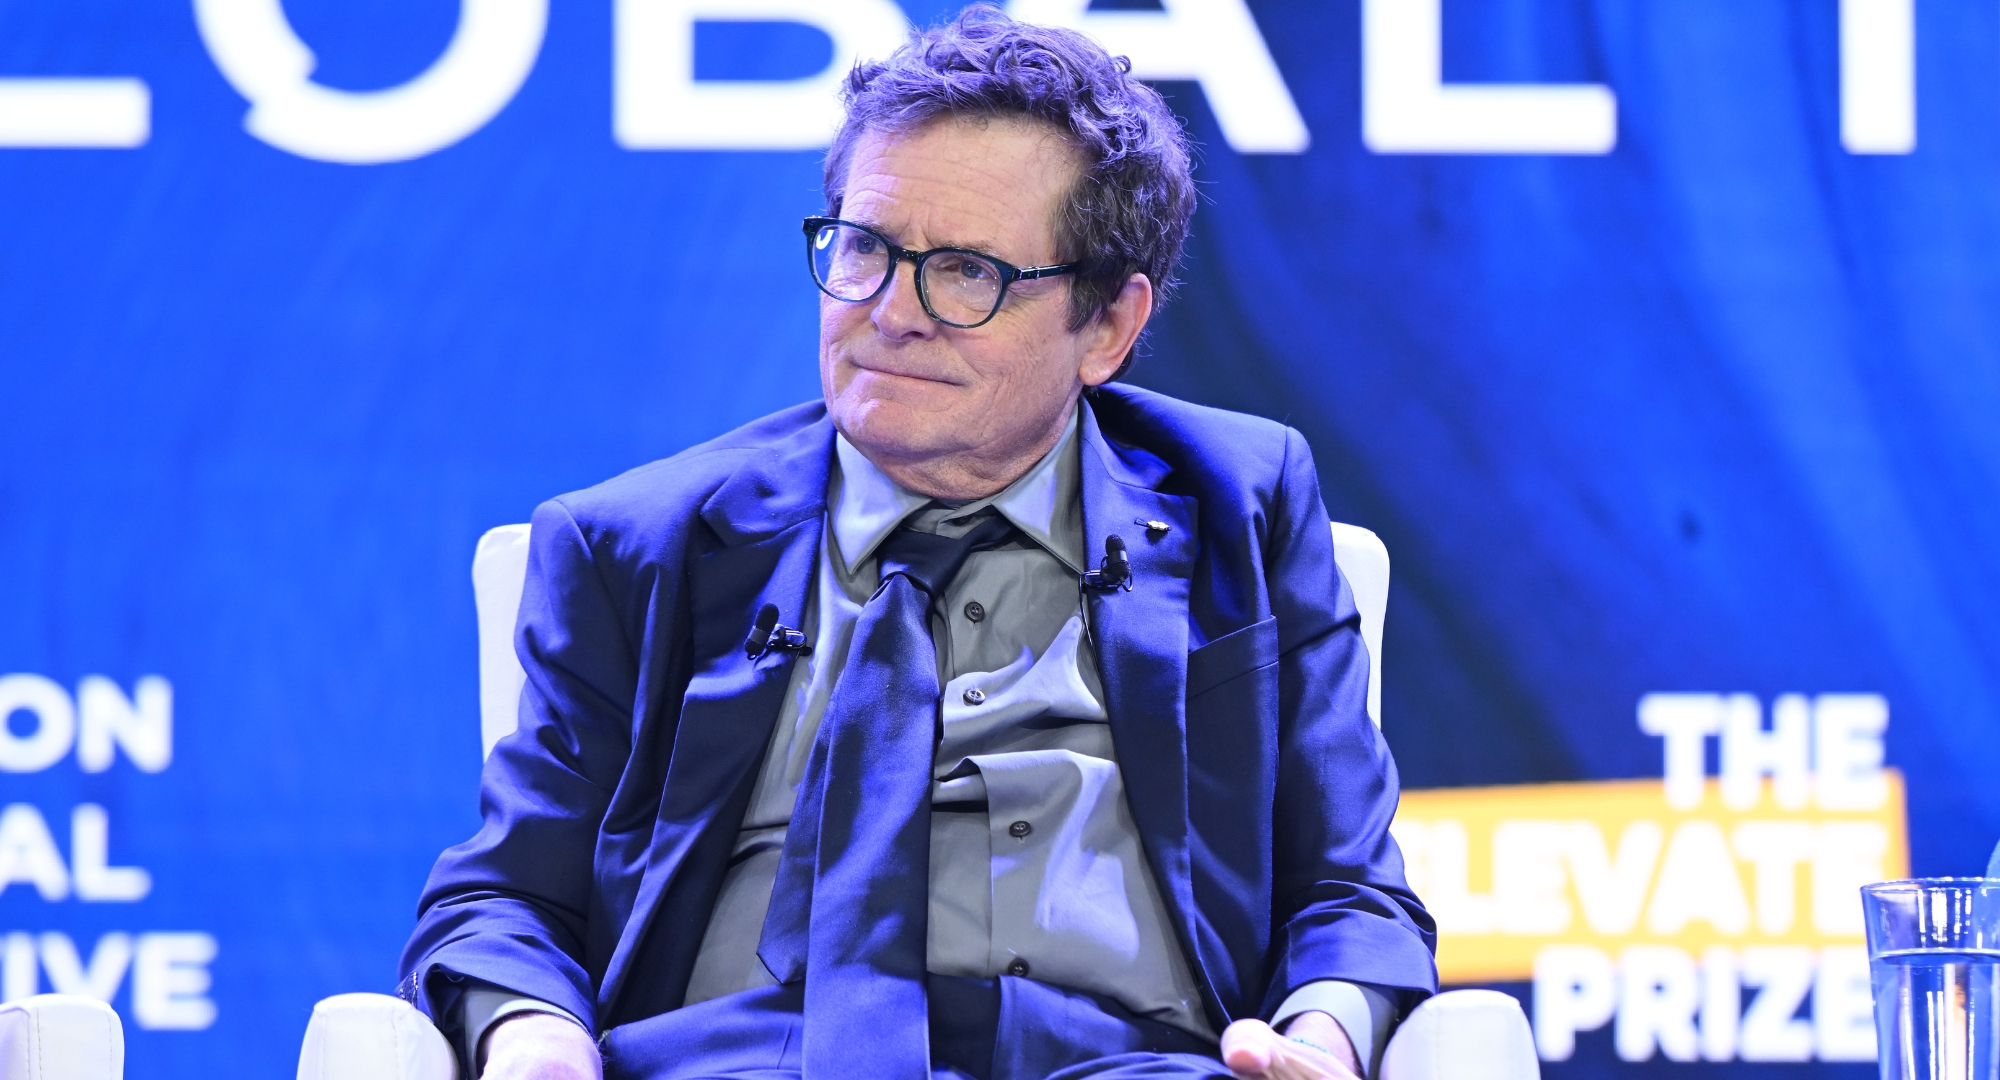 Michael J. Fox shares candid reflection on life with Parkinson’s disease